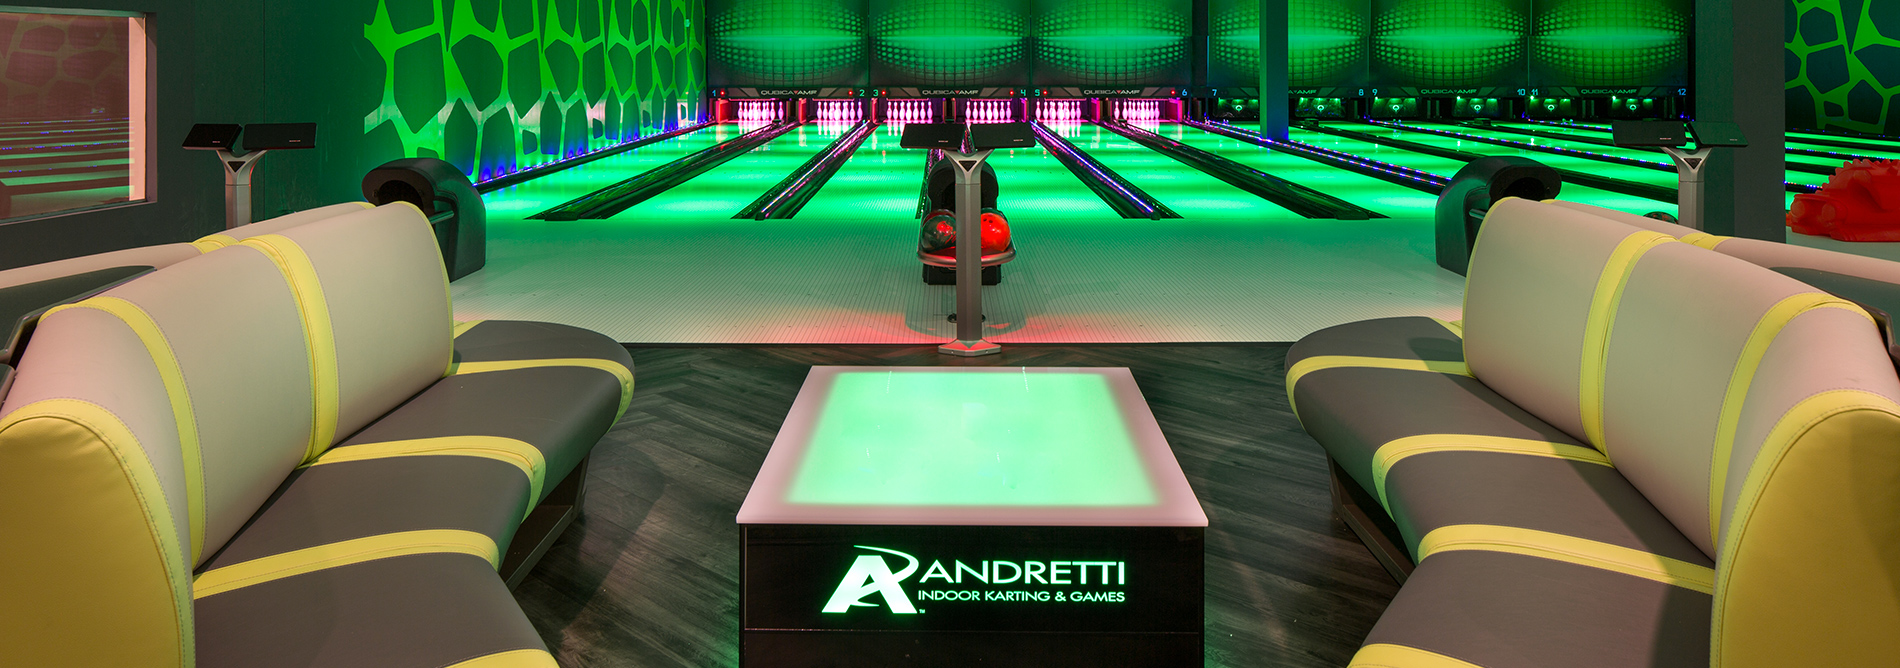 Bowling-QubicaAMF-harmony-andretti-banner.jpg